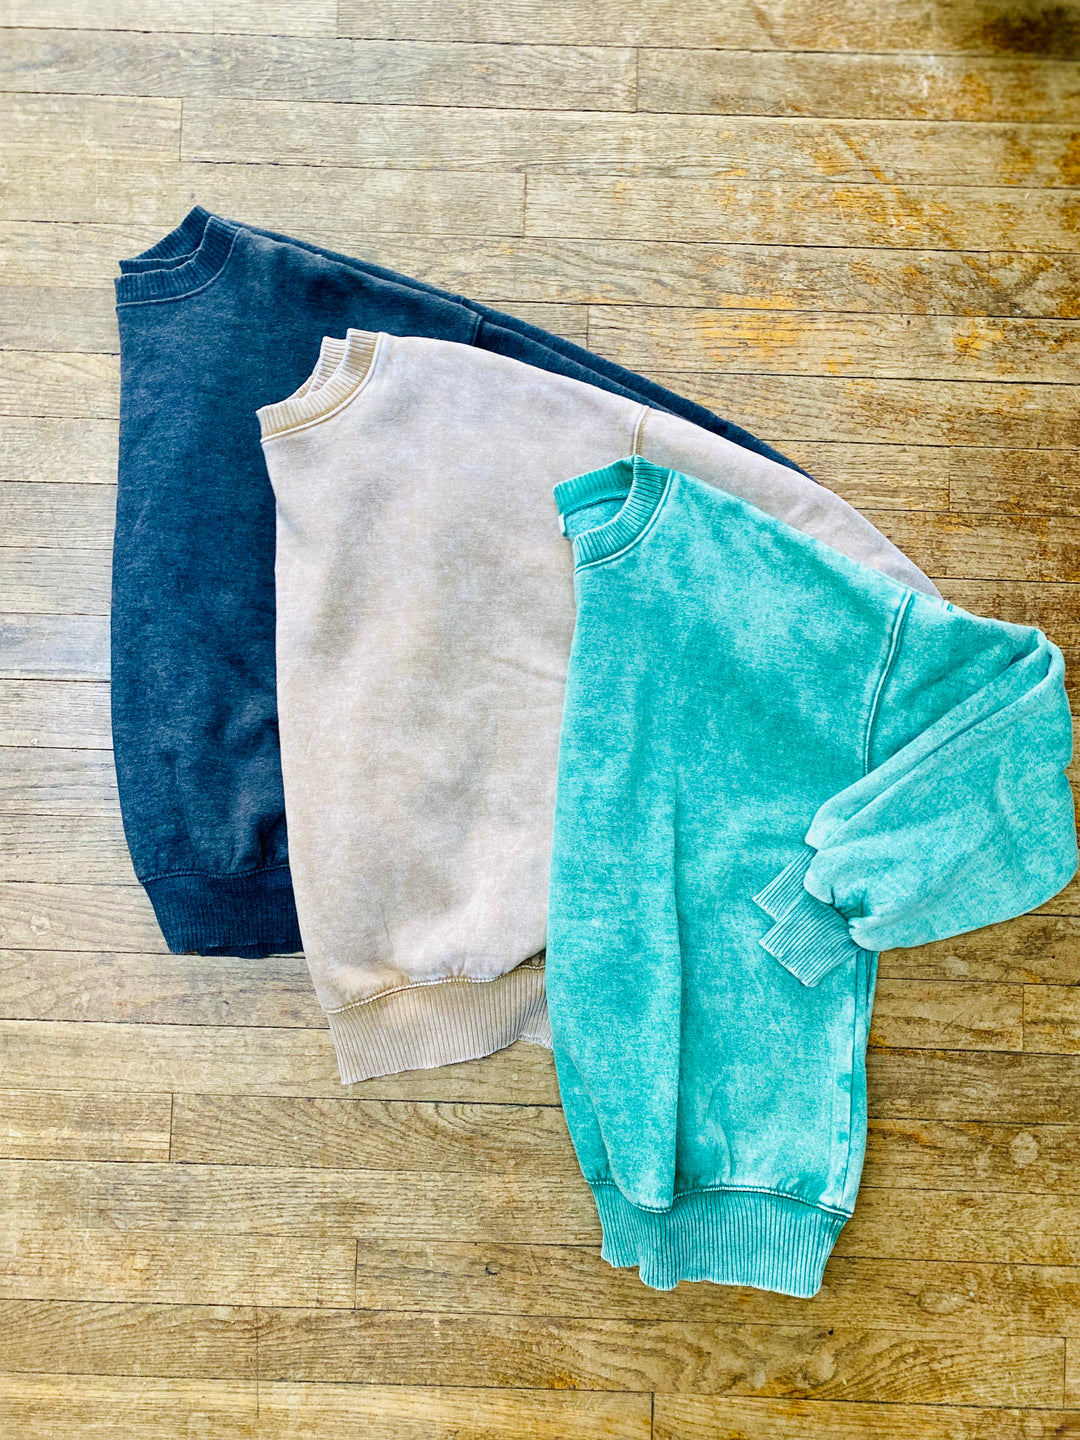 Everyday Crew Neck Pullover Sweater - Green-Tops-Anatomy Clothing Boutique in Brenham, Texas